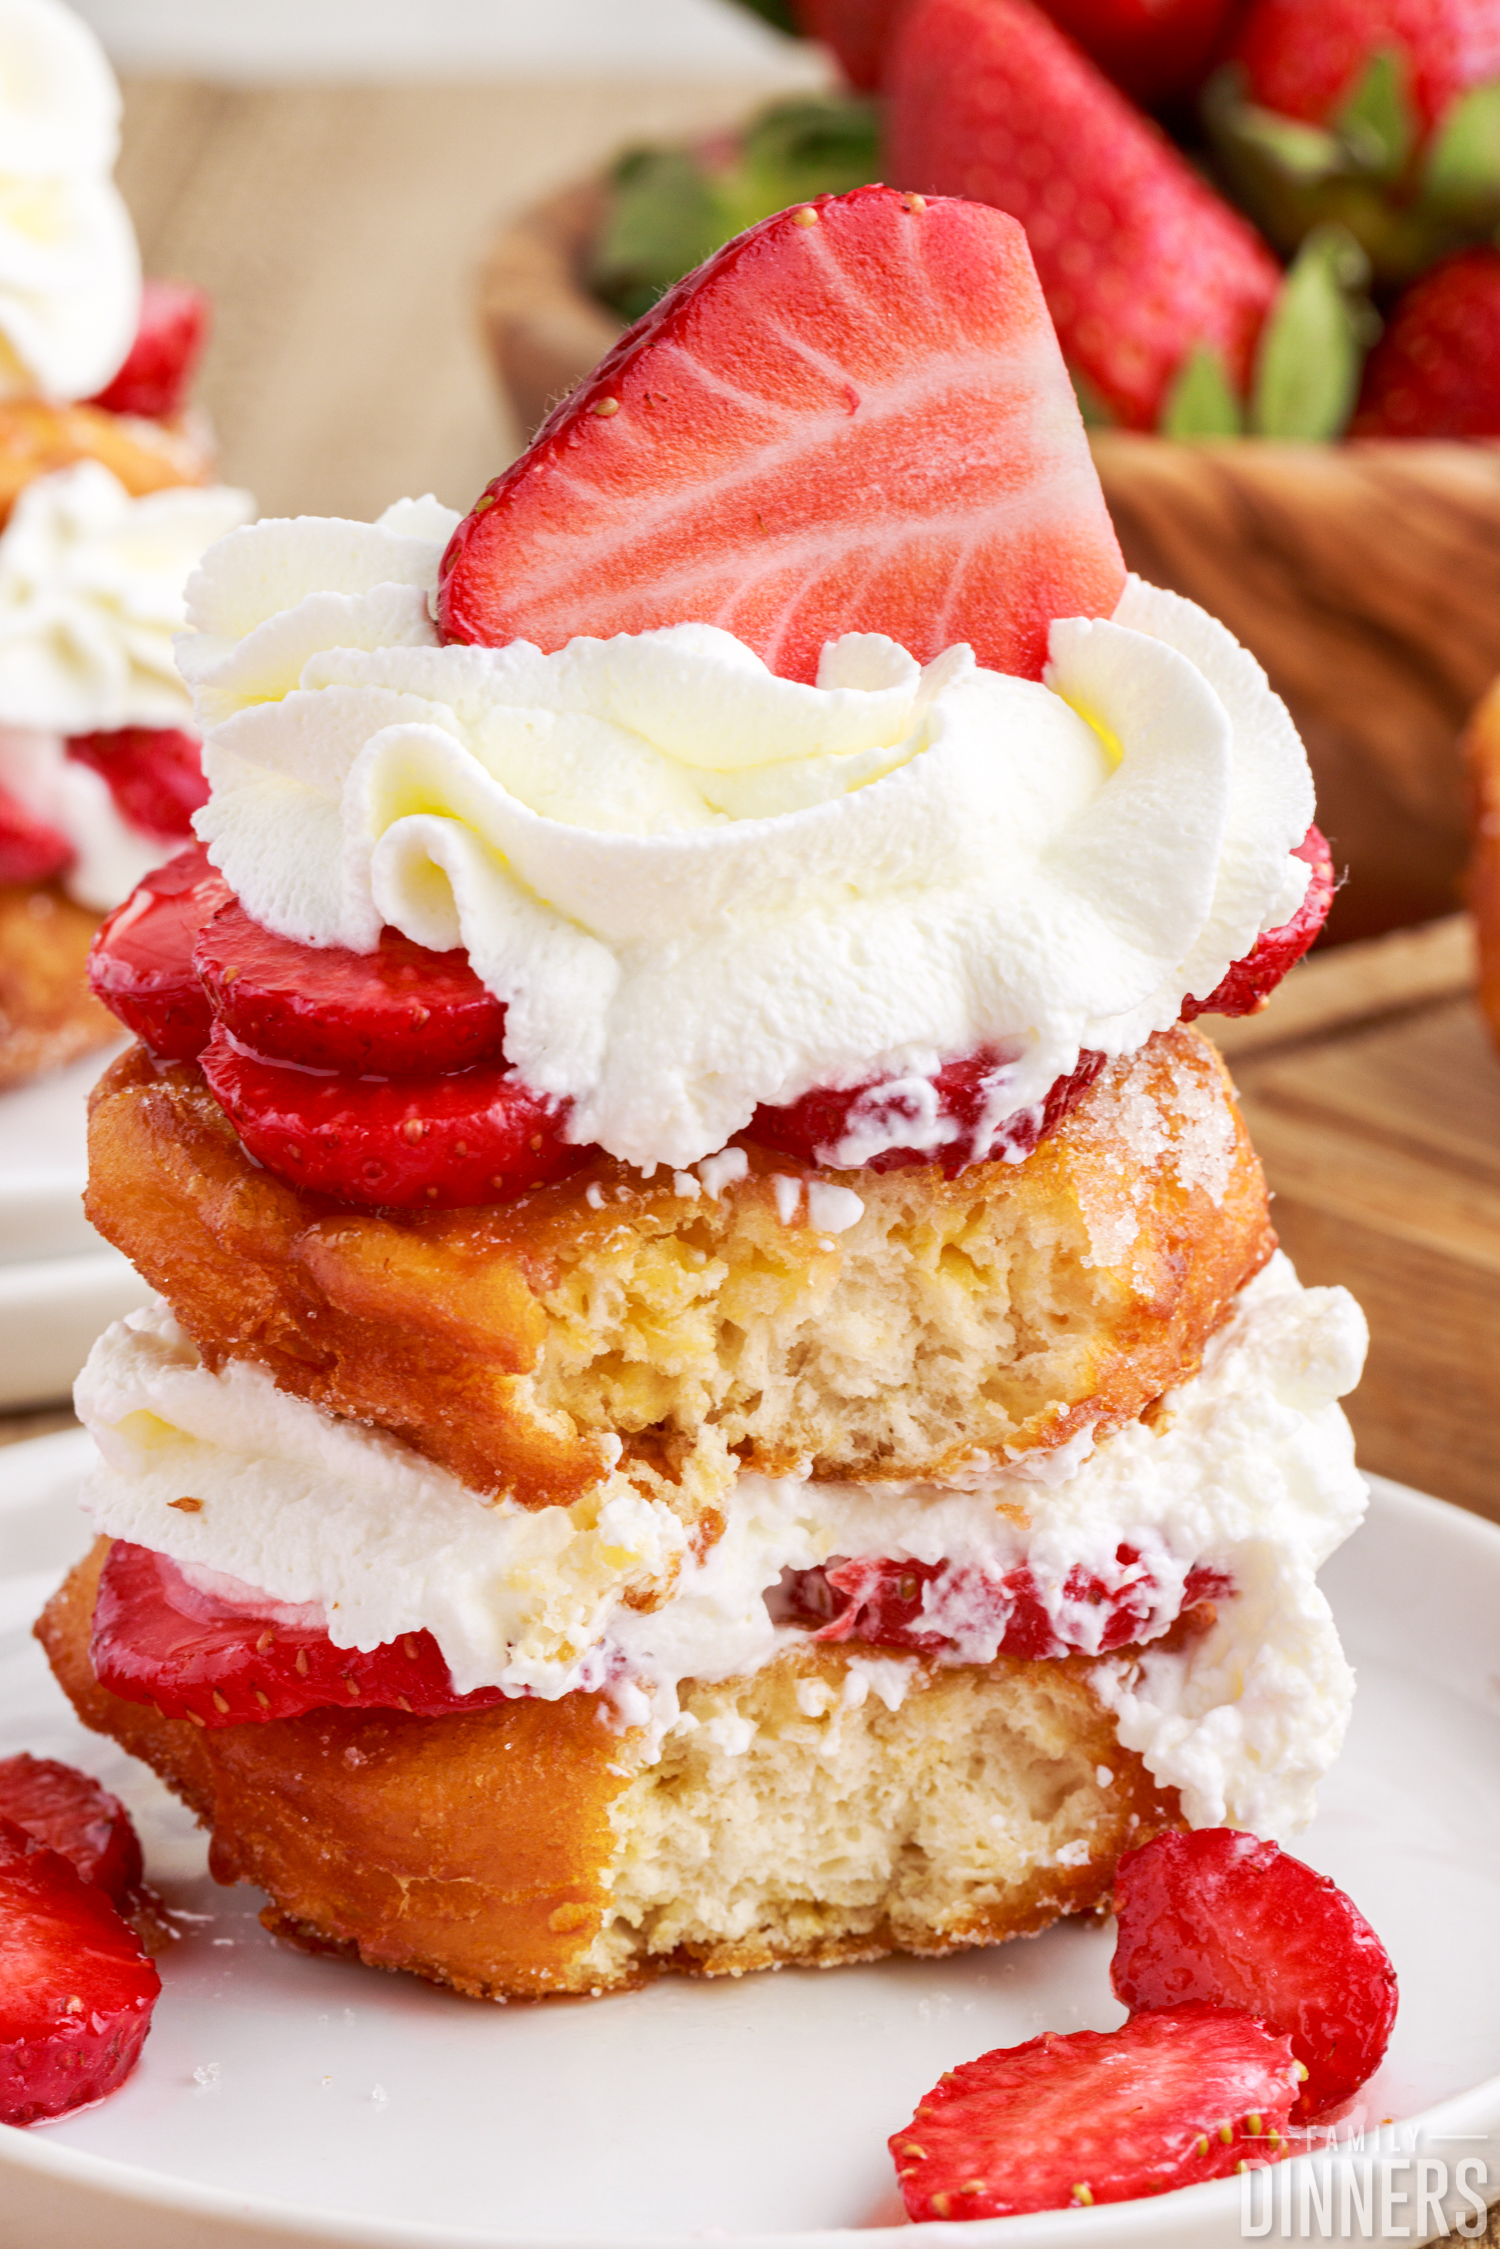 stack of deep fried strawberry shortcake, layered with fresh strawberries and whipped cream on a white plate